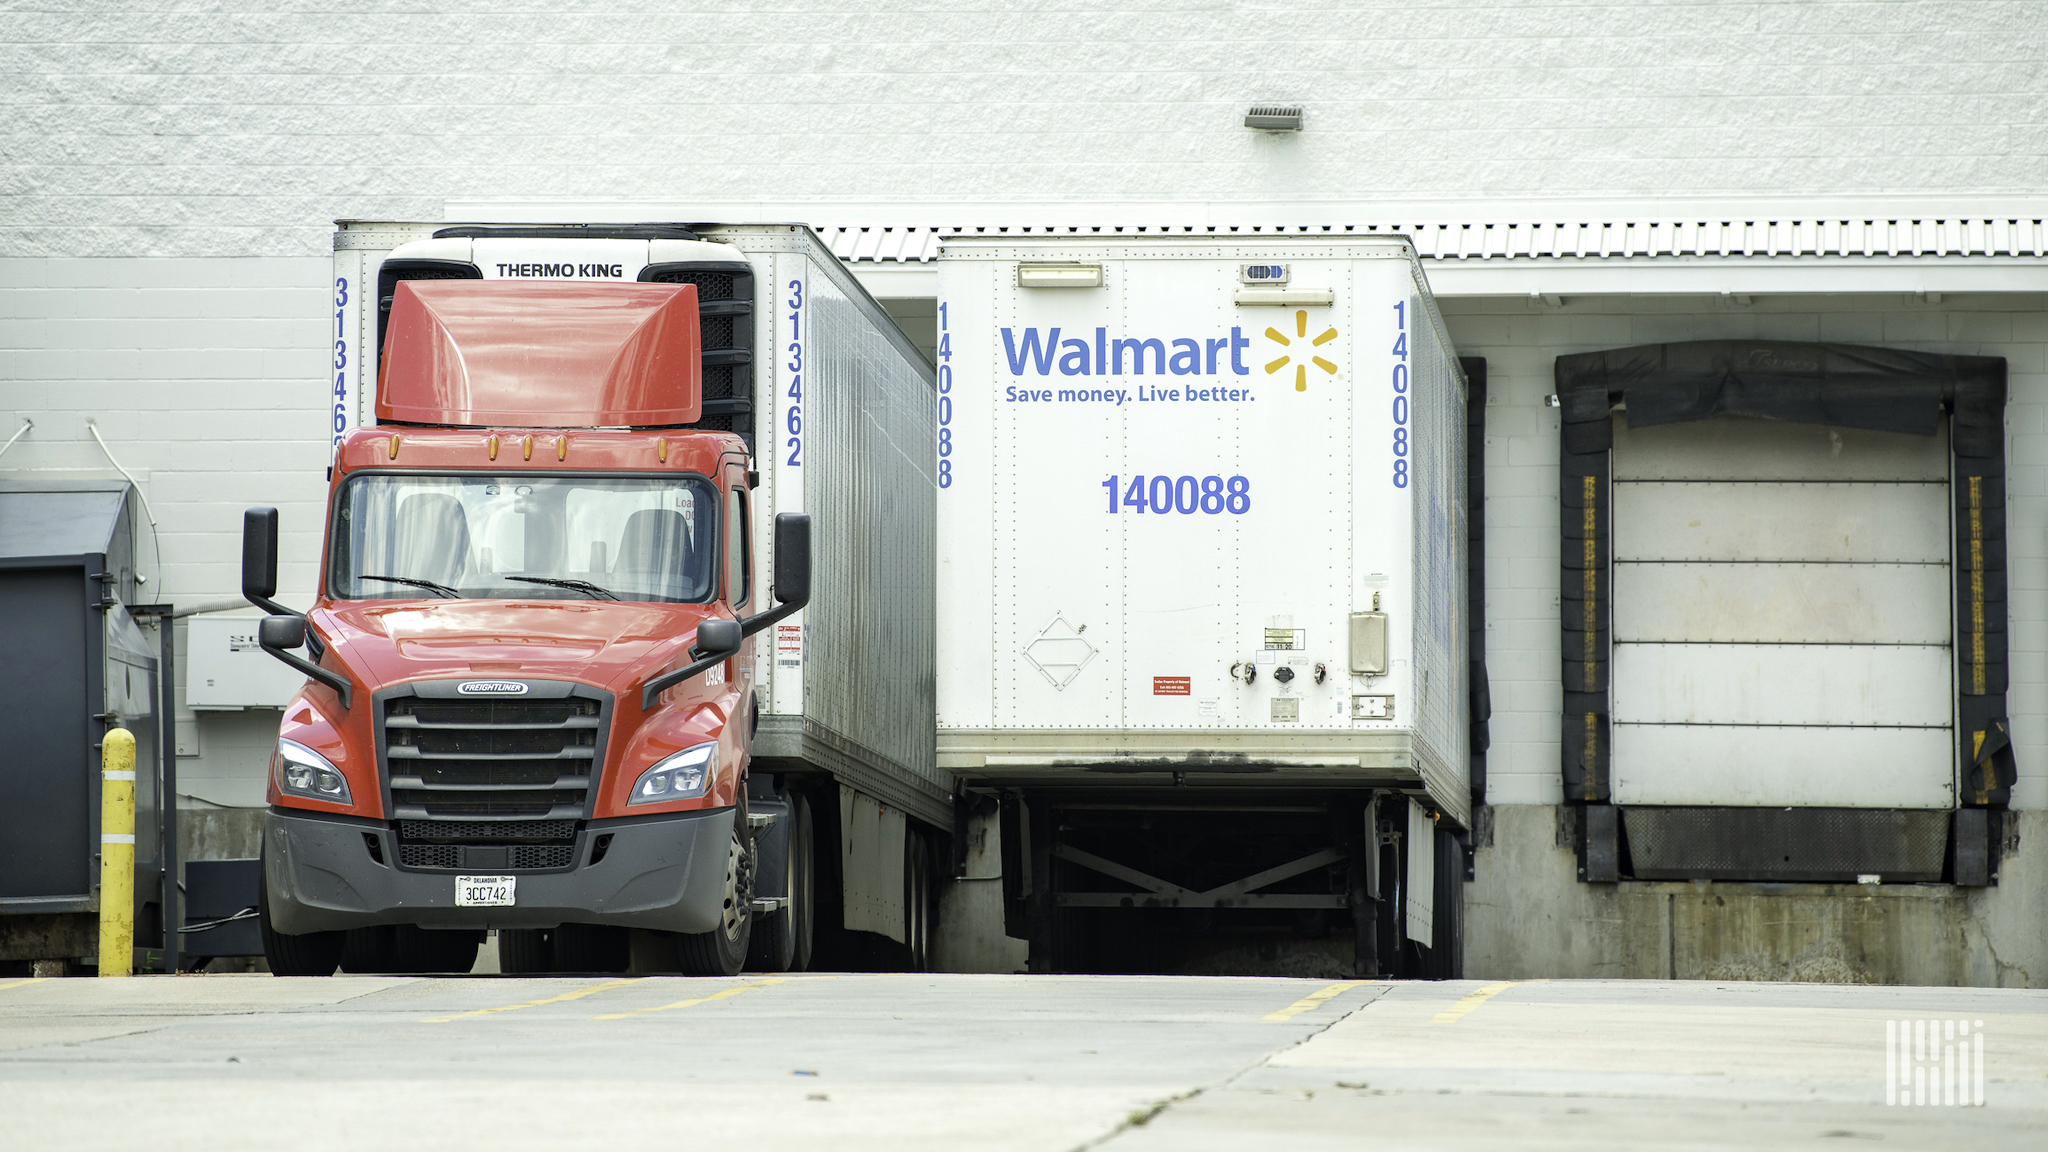 Walmart Q1 profits take hit on higher costs, supply chain issues